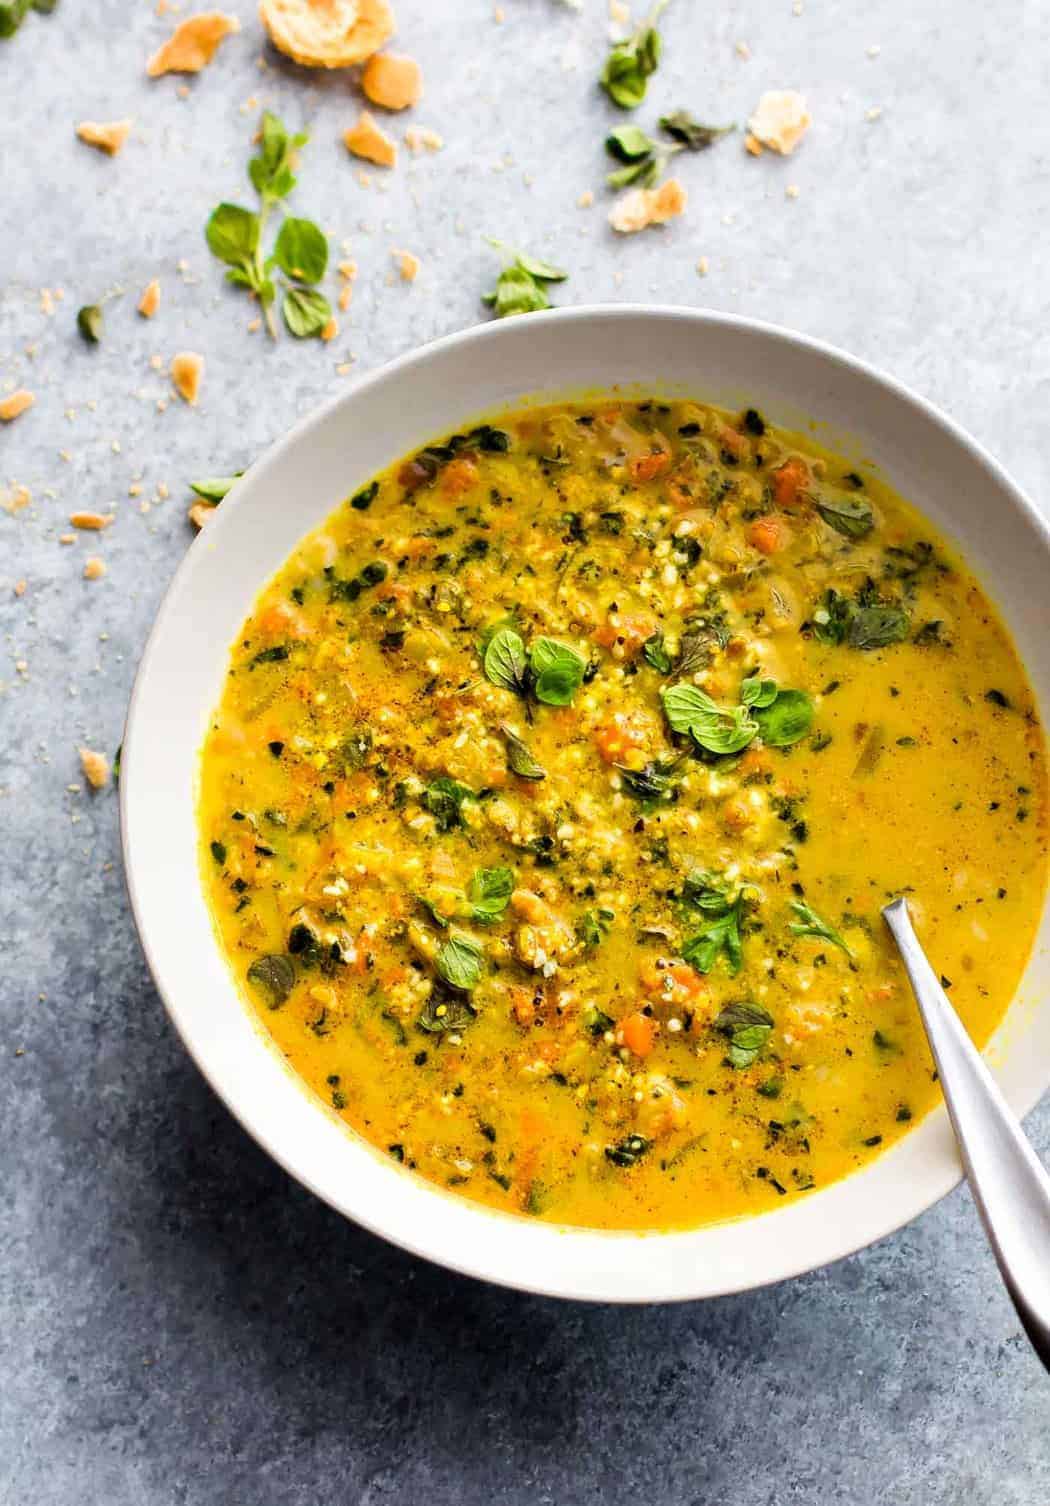 Curried Cauliflower Rice Kale Soup from Cotter Crunch | 30 Whole30 Soups, Stews & Chilis | healthy soup recipes | whole30 meal ideas | whole30 recipes | whole30 chili recipes || The Real Food Dietitians #whole30soups #whole30recipe #whole30meals